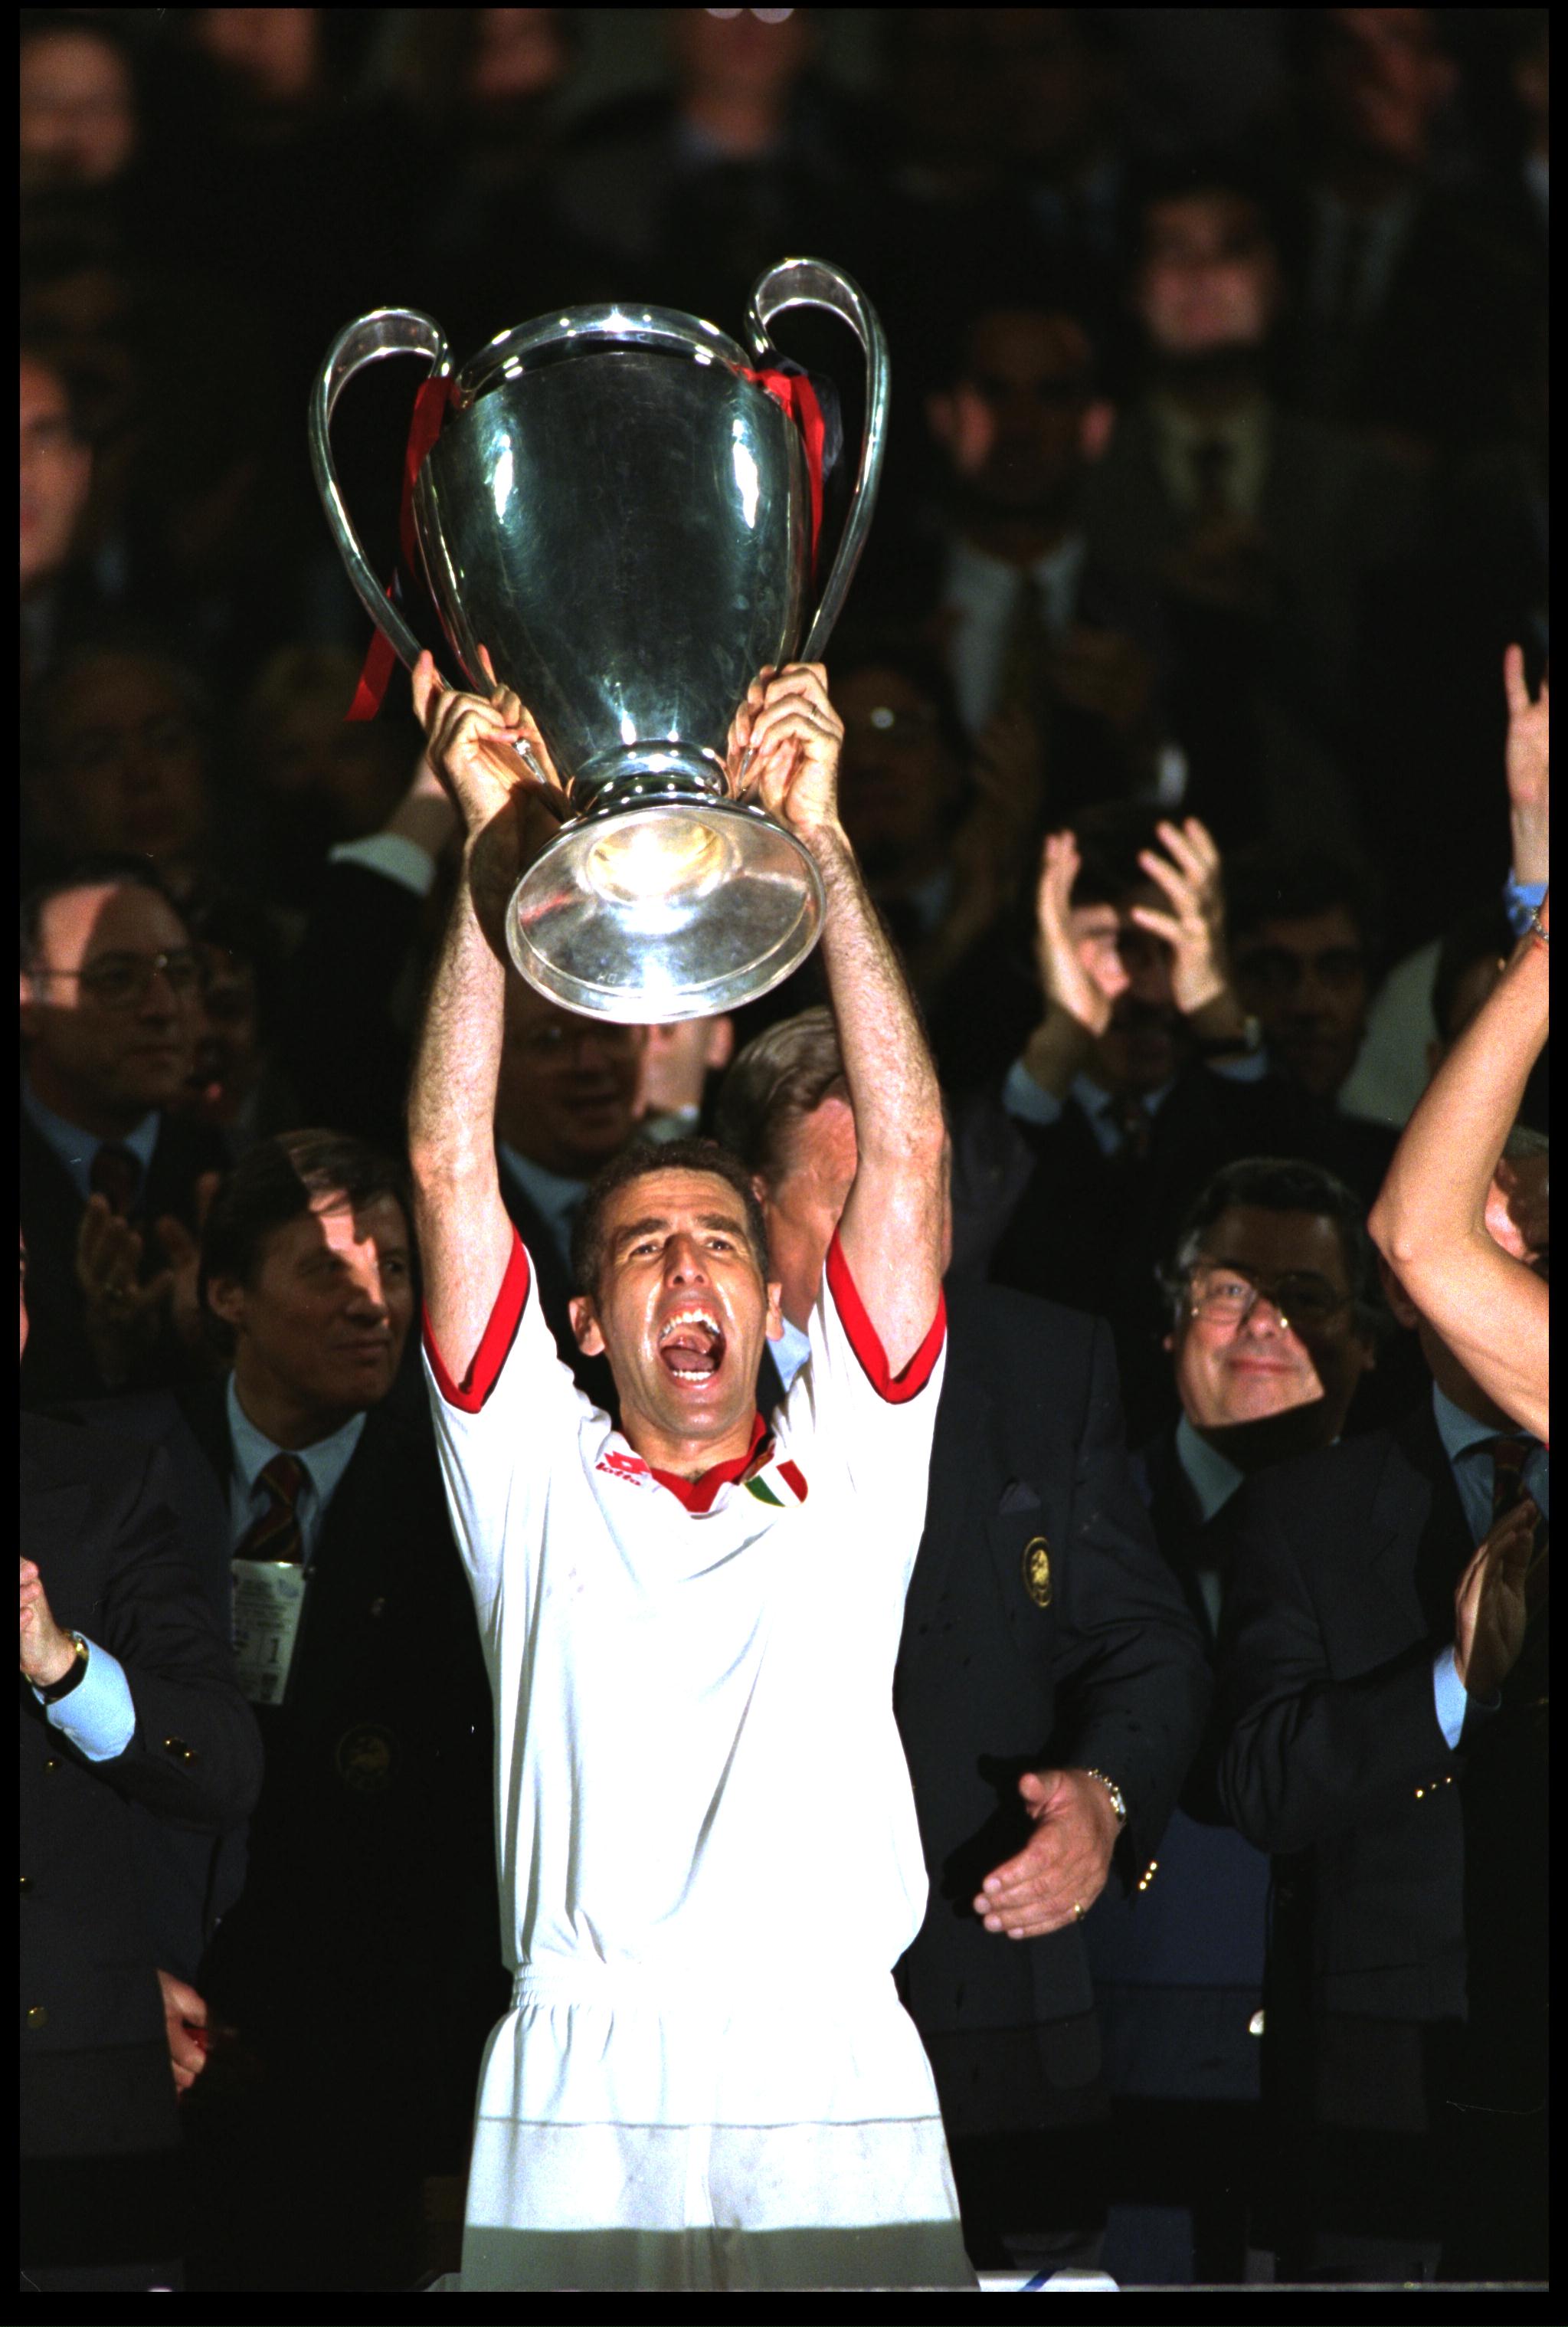 18 MAY 1994:  MAURO TASSOTTI OF AC MILAN LIFTS THE EUROPEAN CUP OVER HIS HEAD AFTER DEFEATING BARCELONA 4-0 IN THE FINAL PLAYED IN ATHENS IN GREECE.